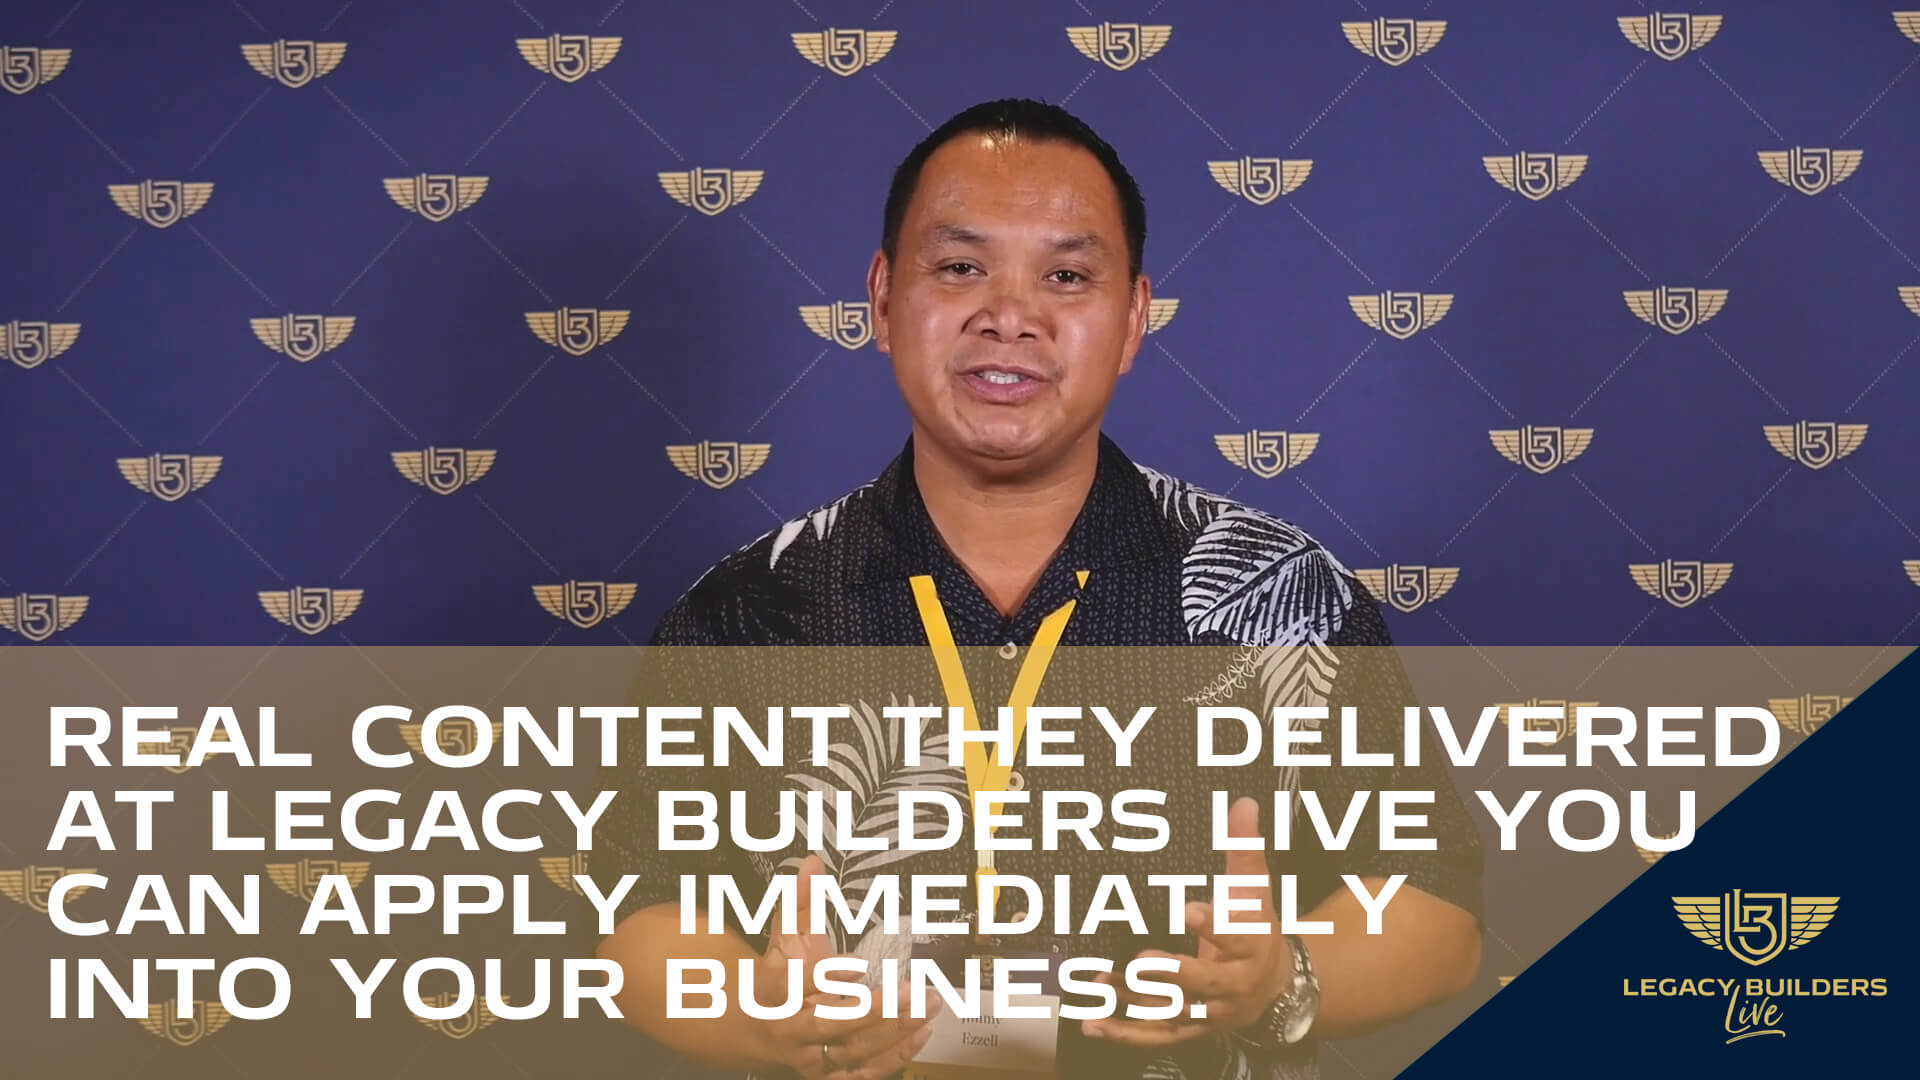 Real content they delivered at Legacy Builders Live you can apply immediately into your business